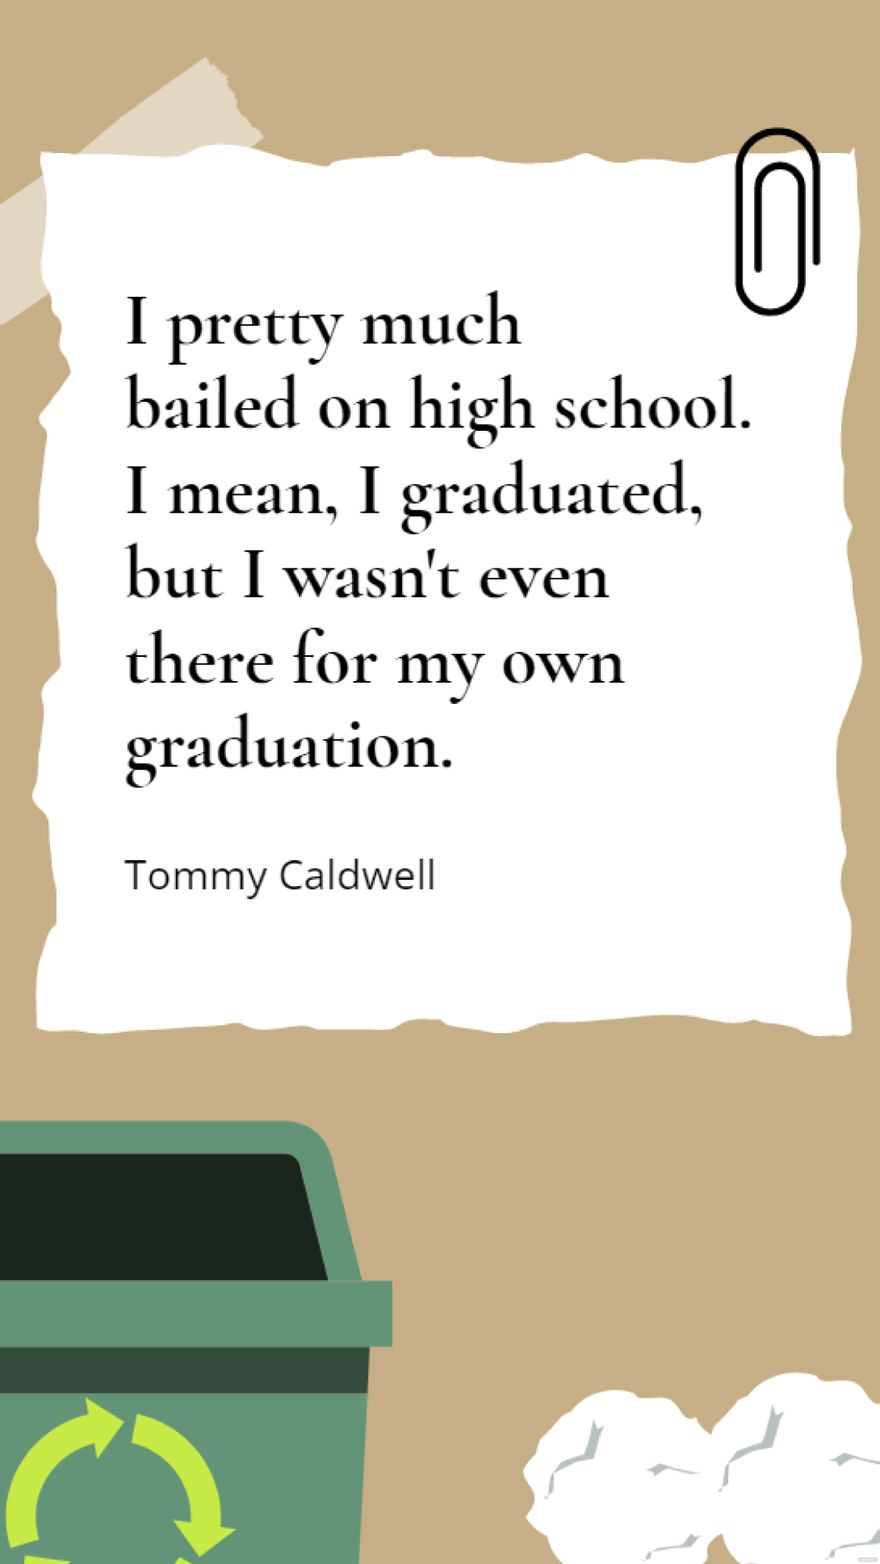 Tommy Caldwell - I pretty much bailed on high school. I mean, I graduated, but I wasn't even there for my own graduation.